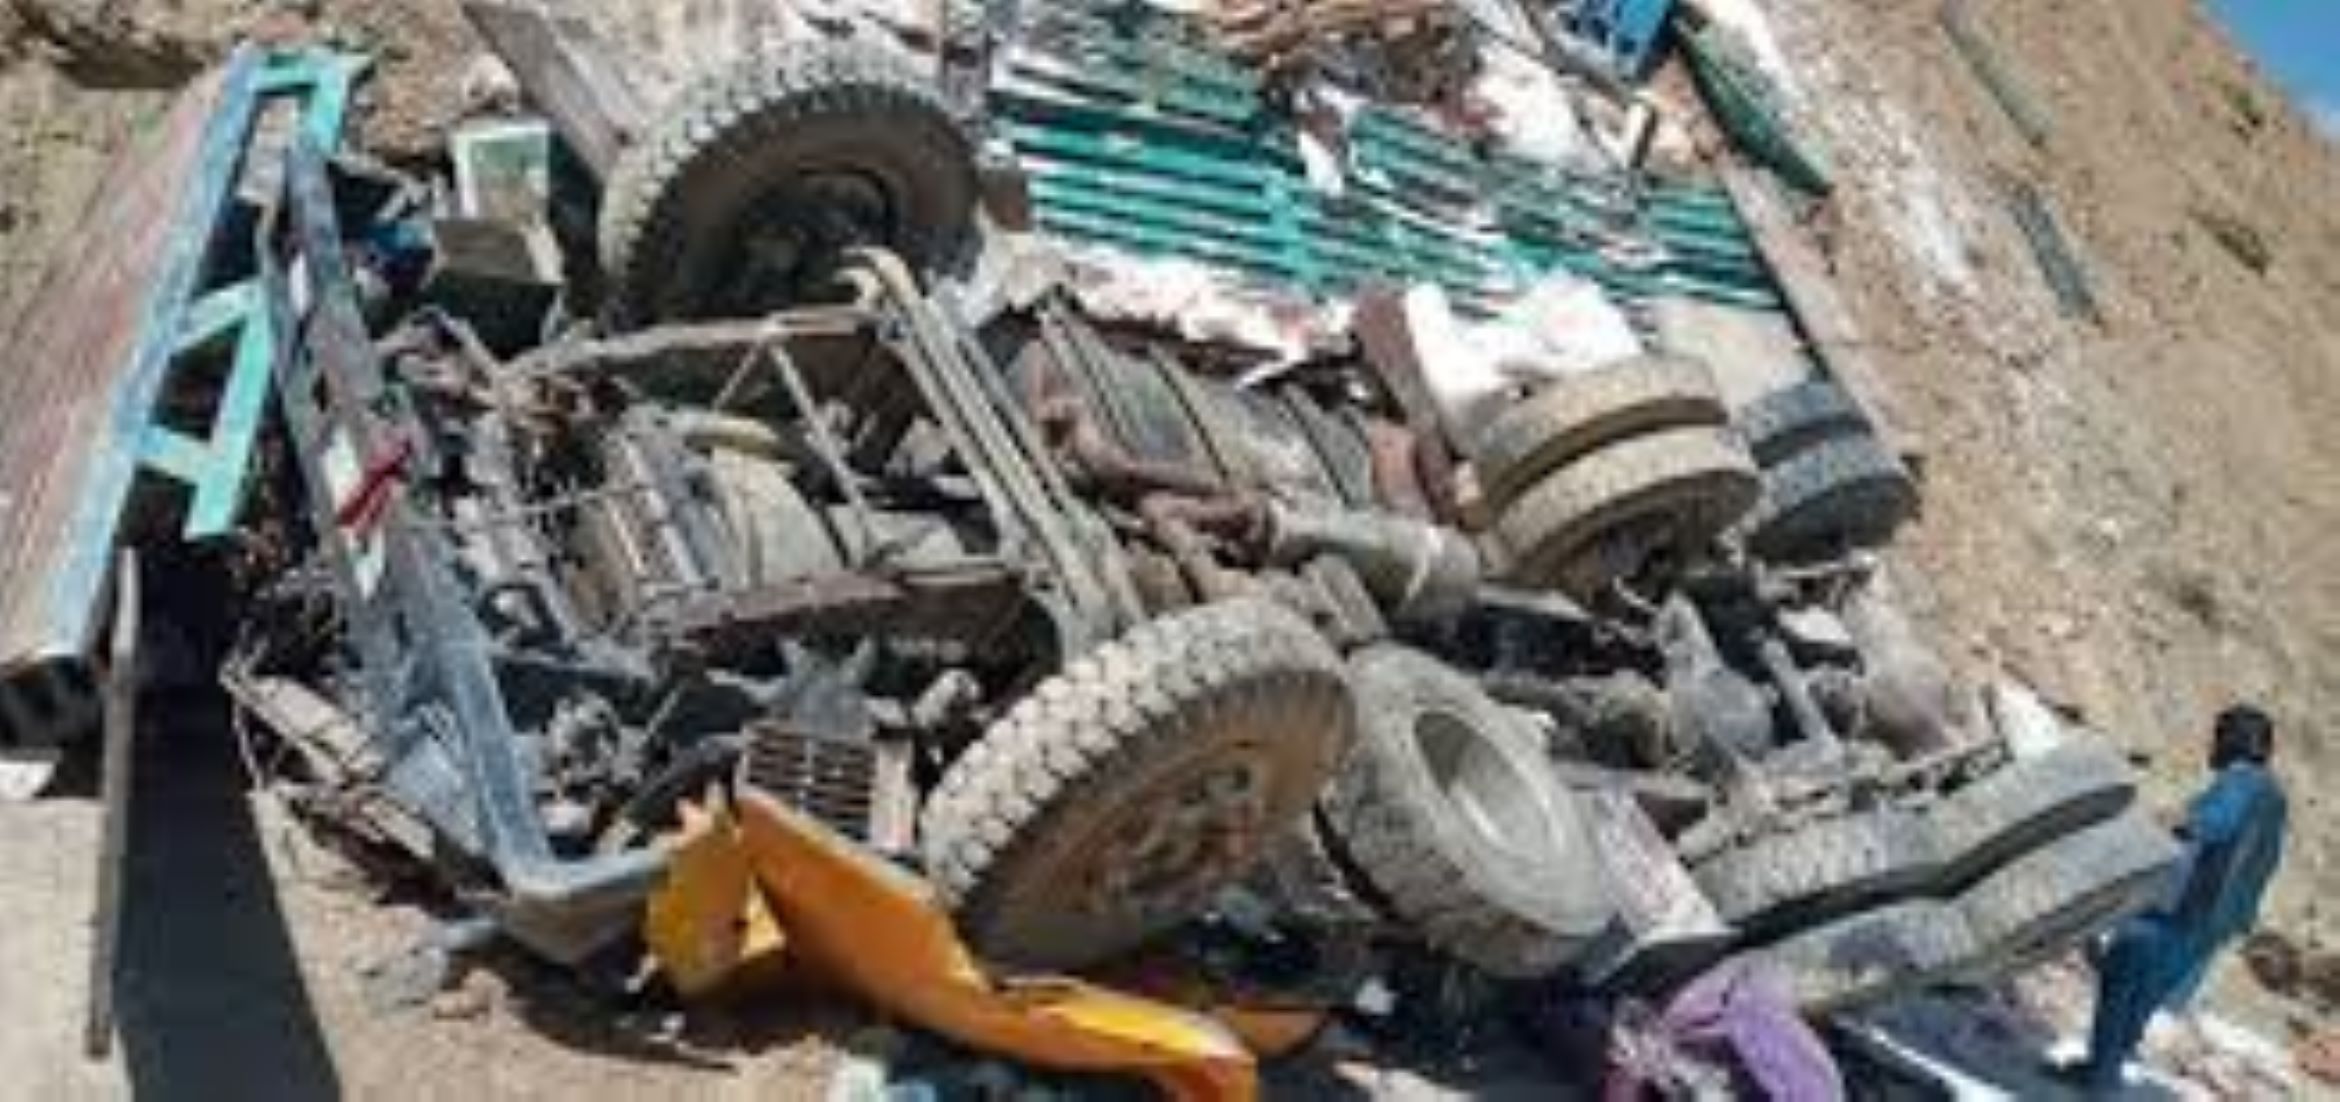 Six Killed, Three Injured In Road Accident In Northern Afghanistan